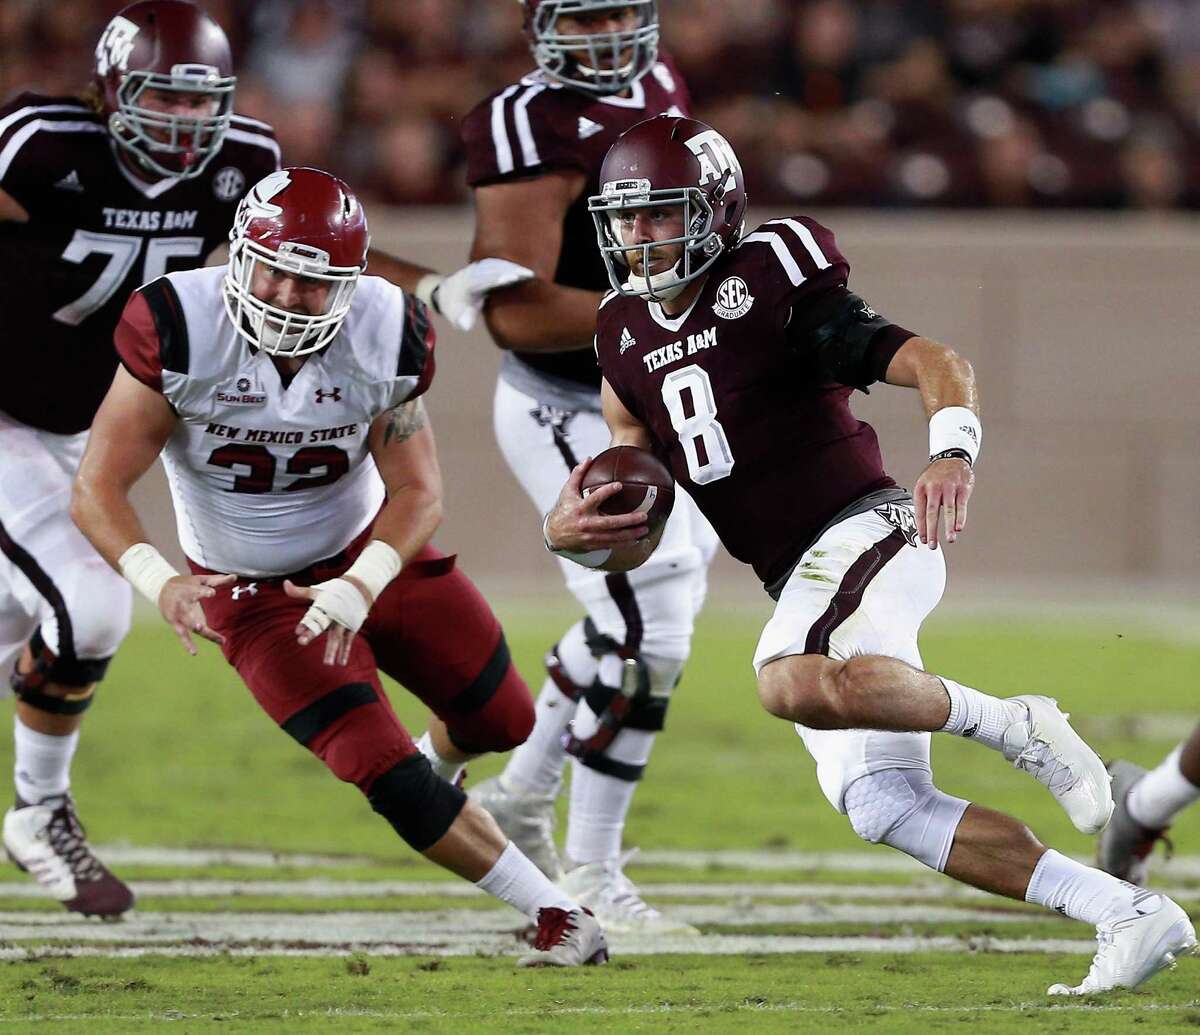 COLLEGE STATION, TX - OCTOBER 29: Trevor Knight #8 of the Texas A&M Aggies scrambles out of the pocket as Dalton Rocha #32 of the New Mexico State Aggies pursues on the play at Kyle Field on October 29, 2016 in College Station, Texas. (Photo by Bob Levey/Getty Images)